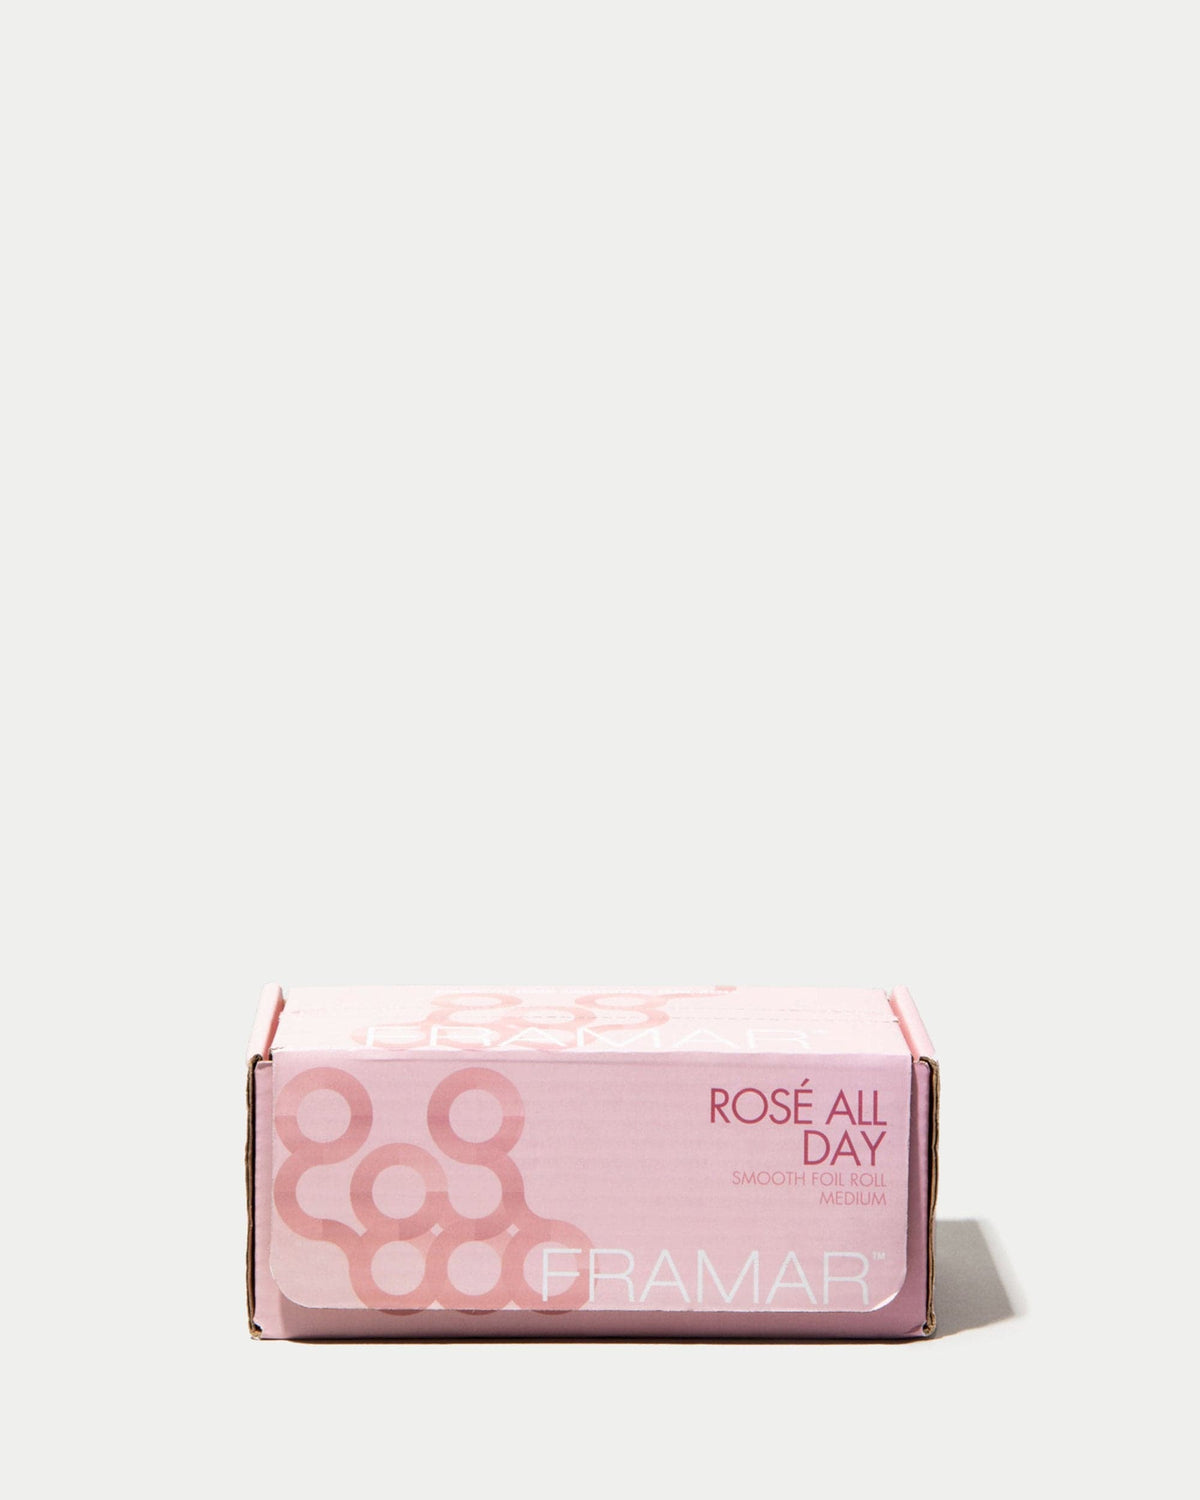 Rose All Day Embossed Roll Medium Hair - Framar - Luxe Pacifique